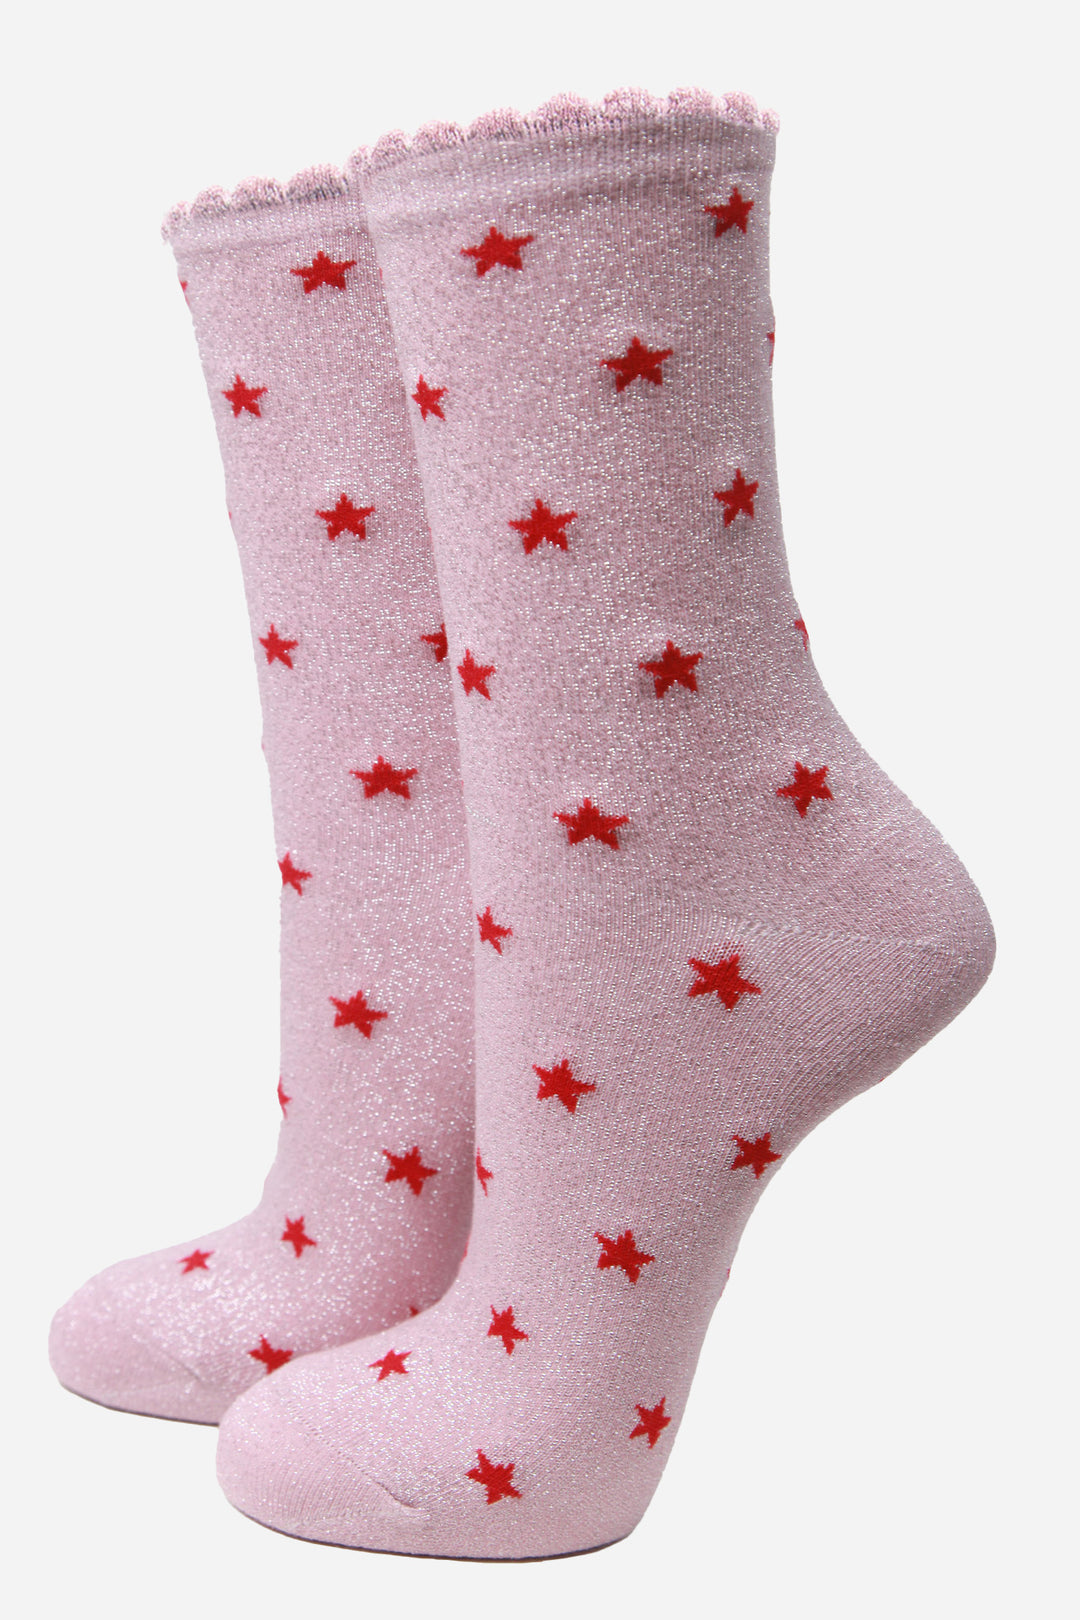 Light Pink Red Star Print Glitter Socks with Scalloped Cuff